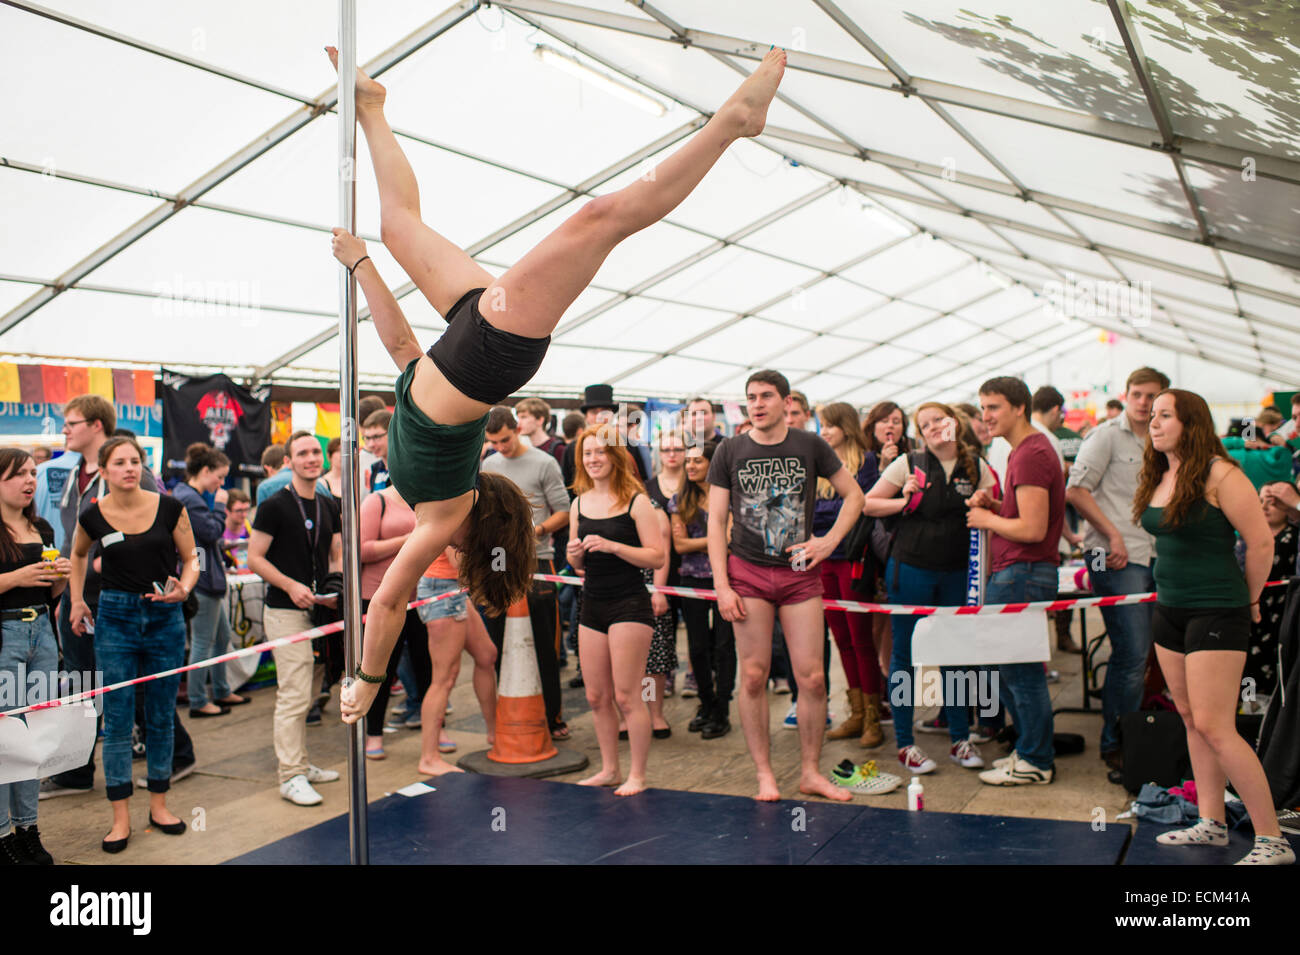 Higher Education: First year undergraduate students watching a fellow student demonstrating pole dancing fitness exercises at the 'freshers fair' at Aberystwyth university at freshers week  on the start of the academic year UK Stock Photo